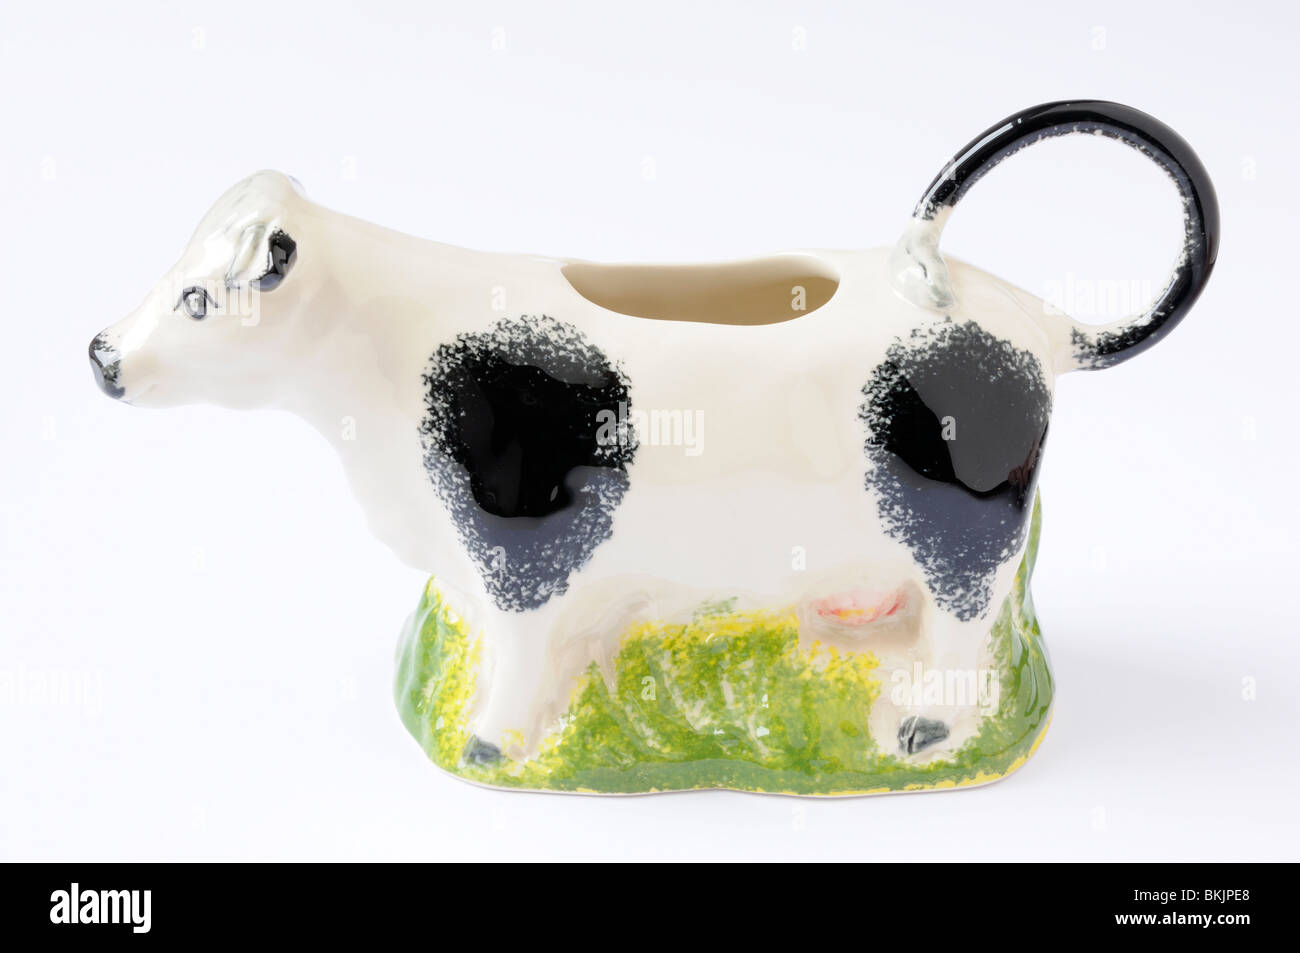 Cow shaped Moorland pottery creamer Stock Photo